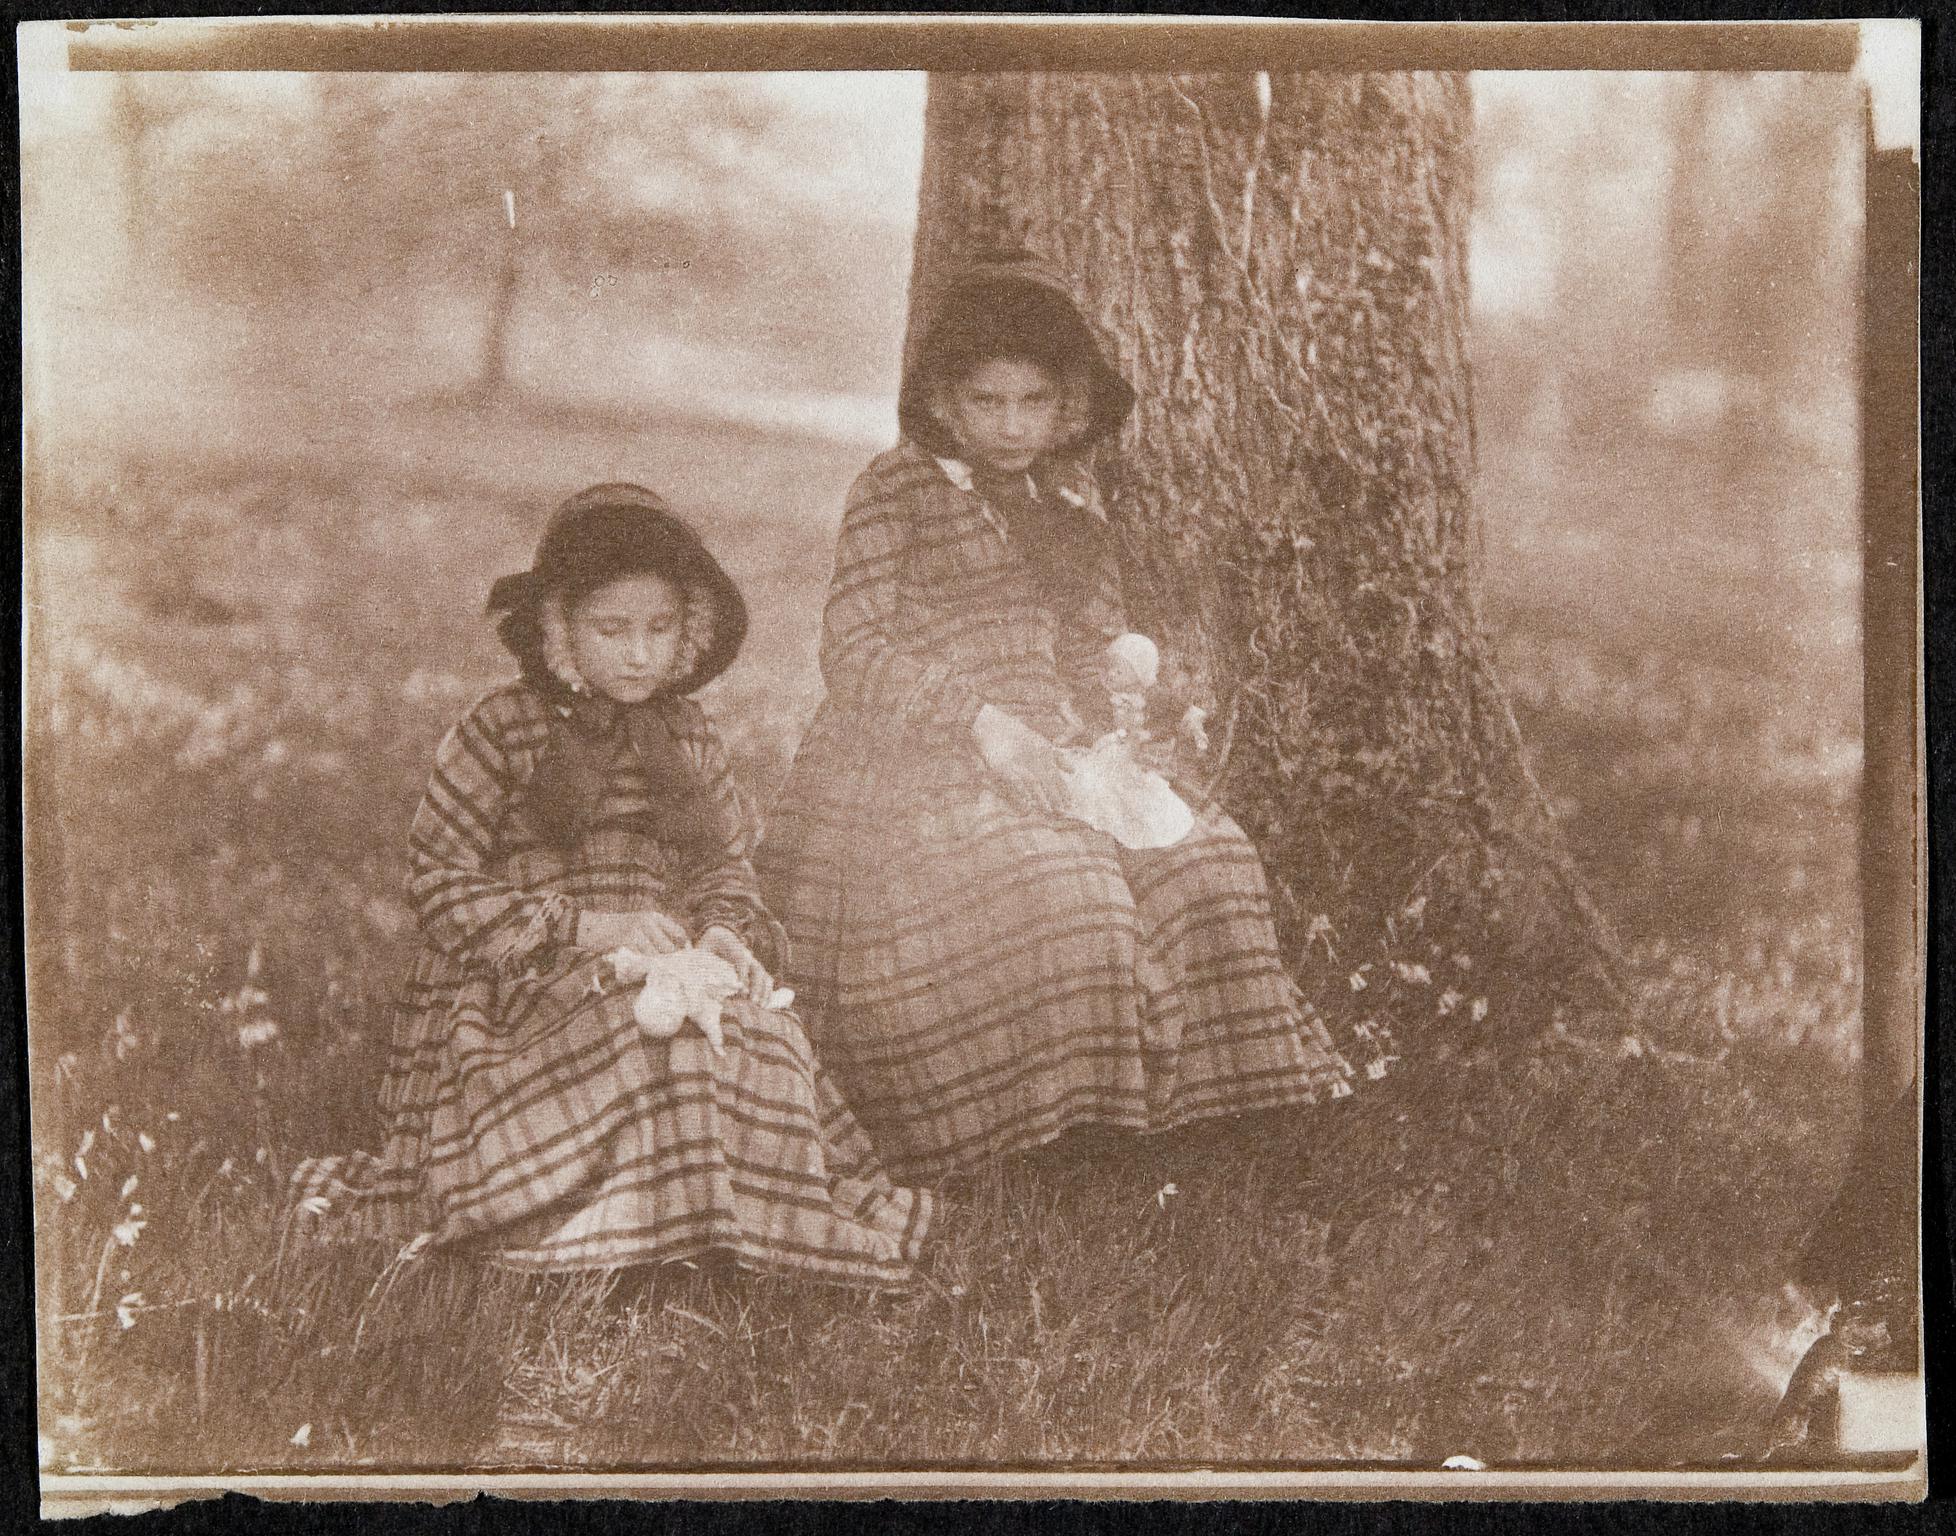 Lucy and Elinor Llewelyn, photograph